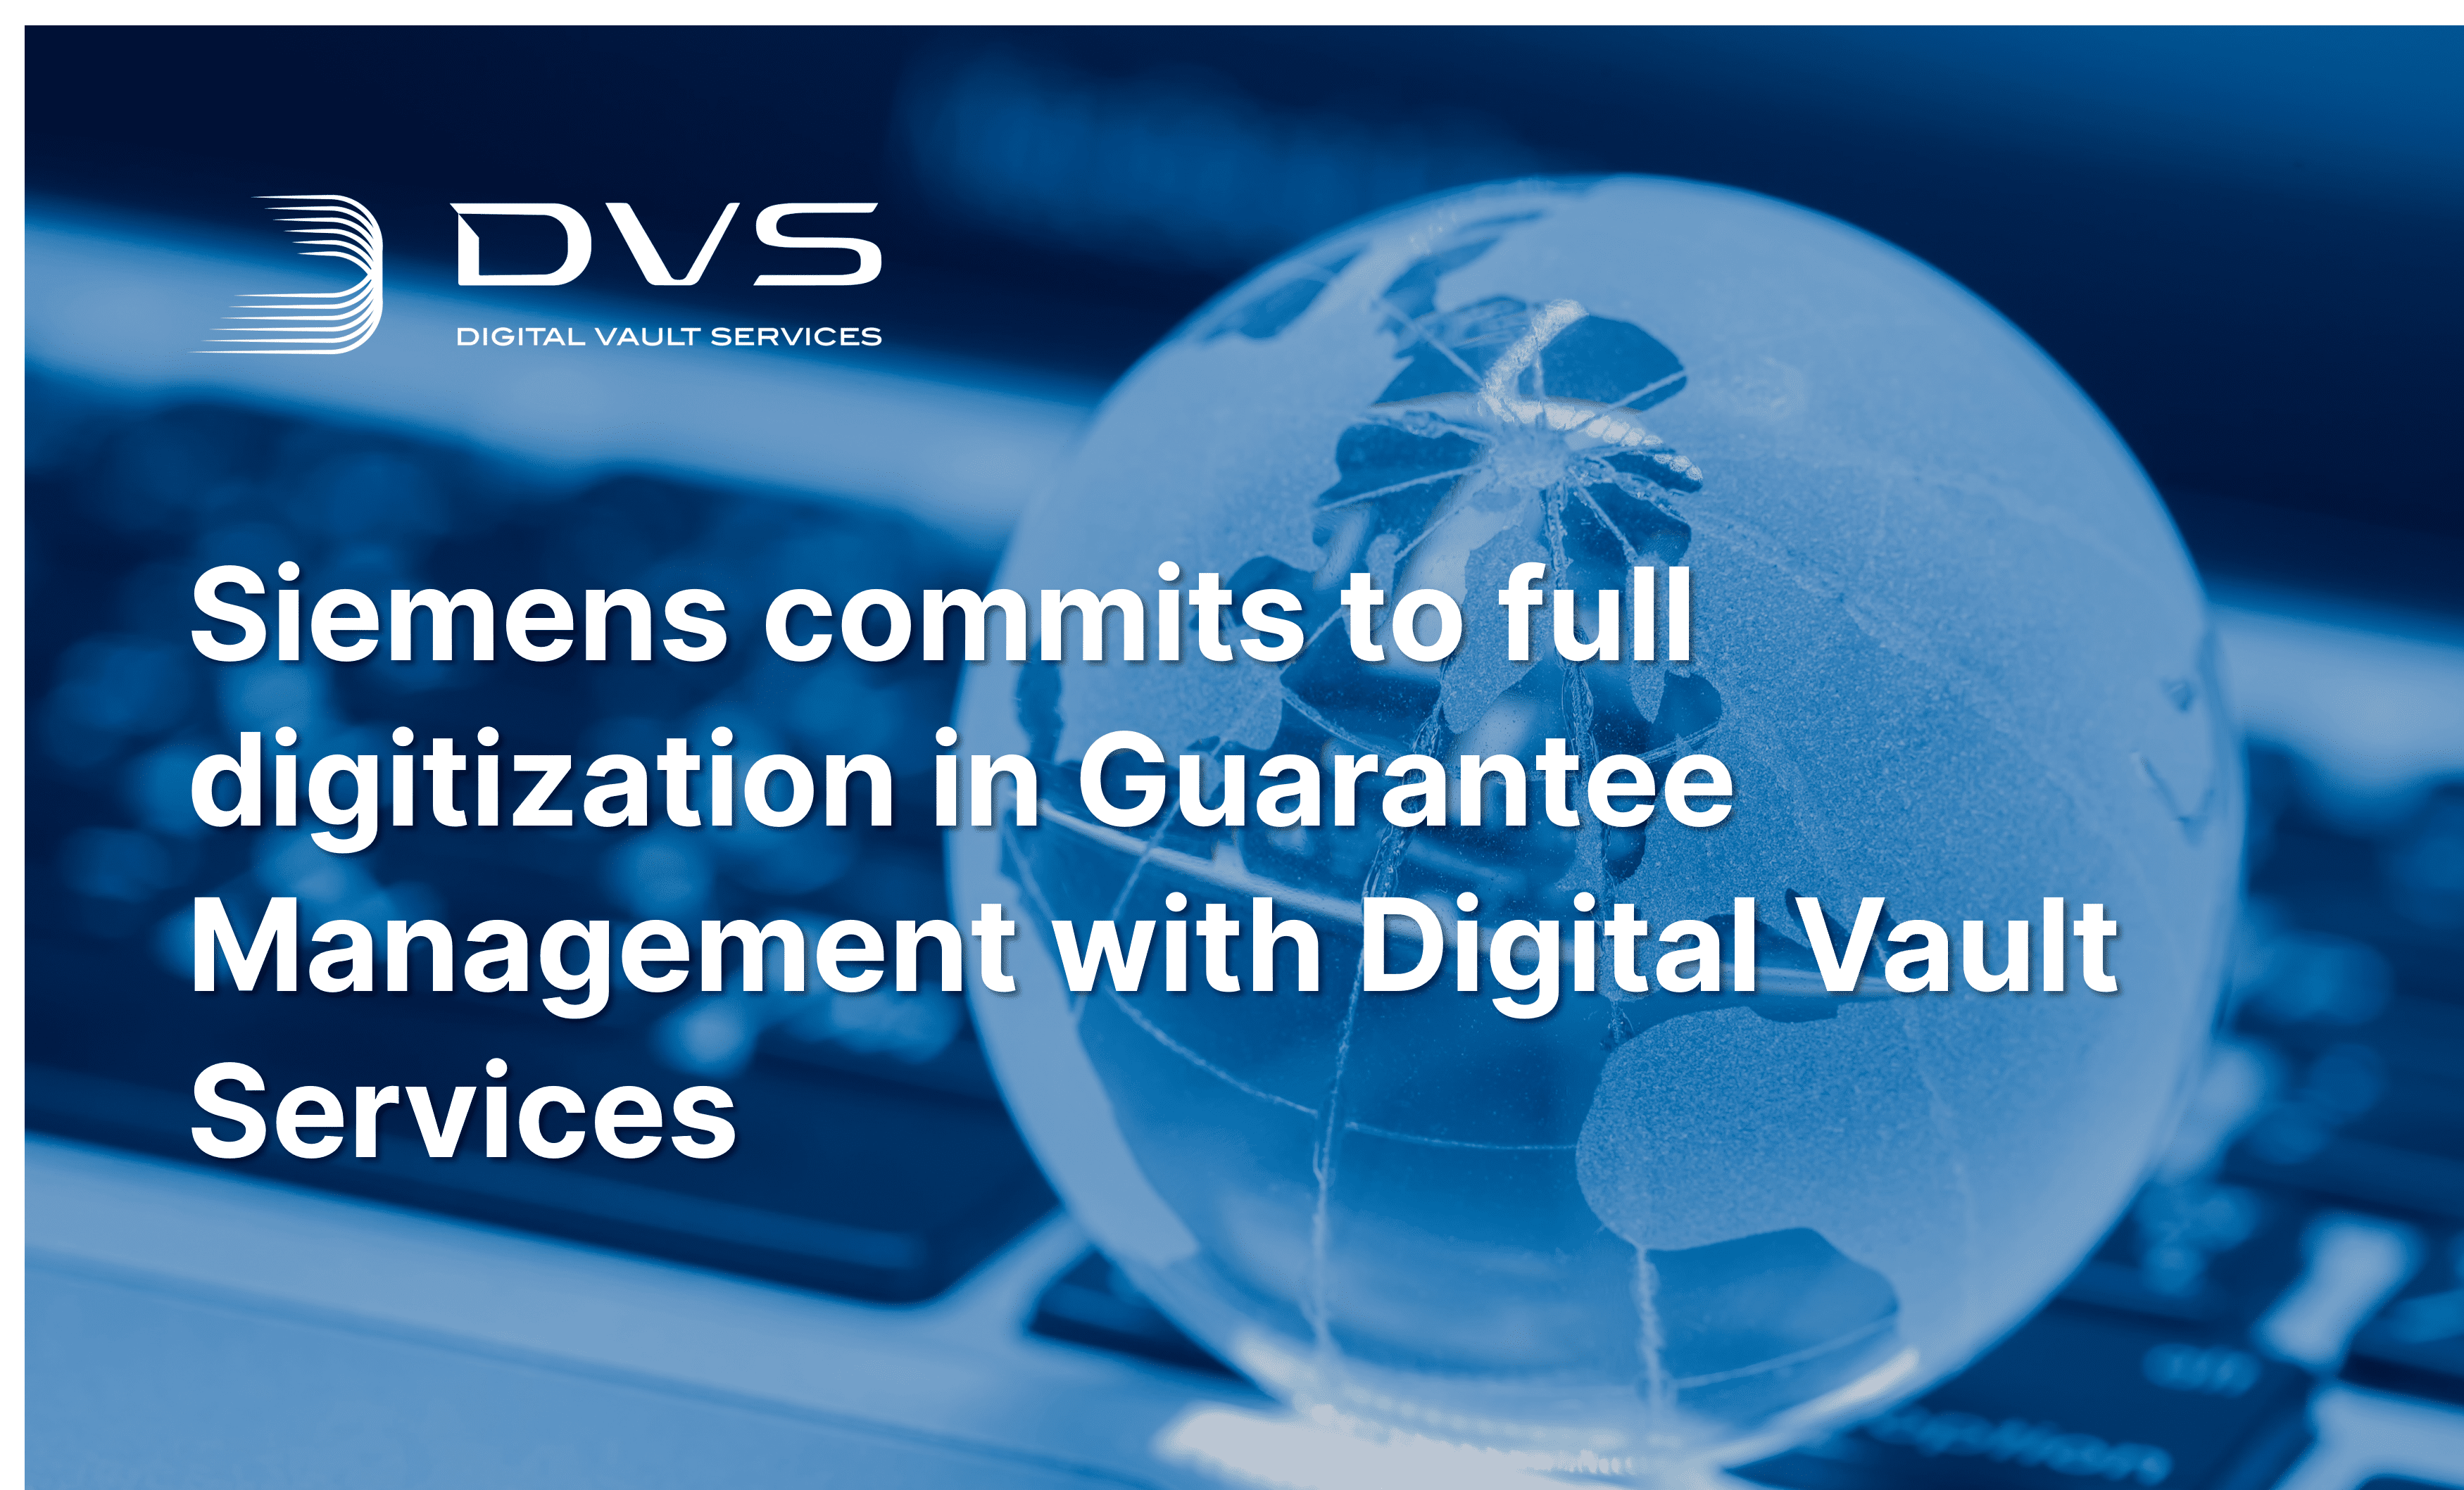 Siemens commits to full digitization in Guarantee Management with Digital Vault Services